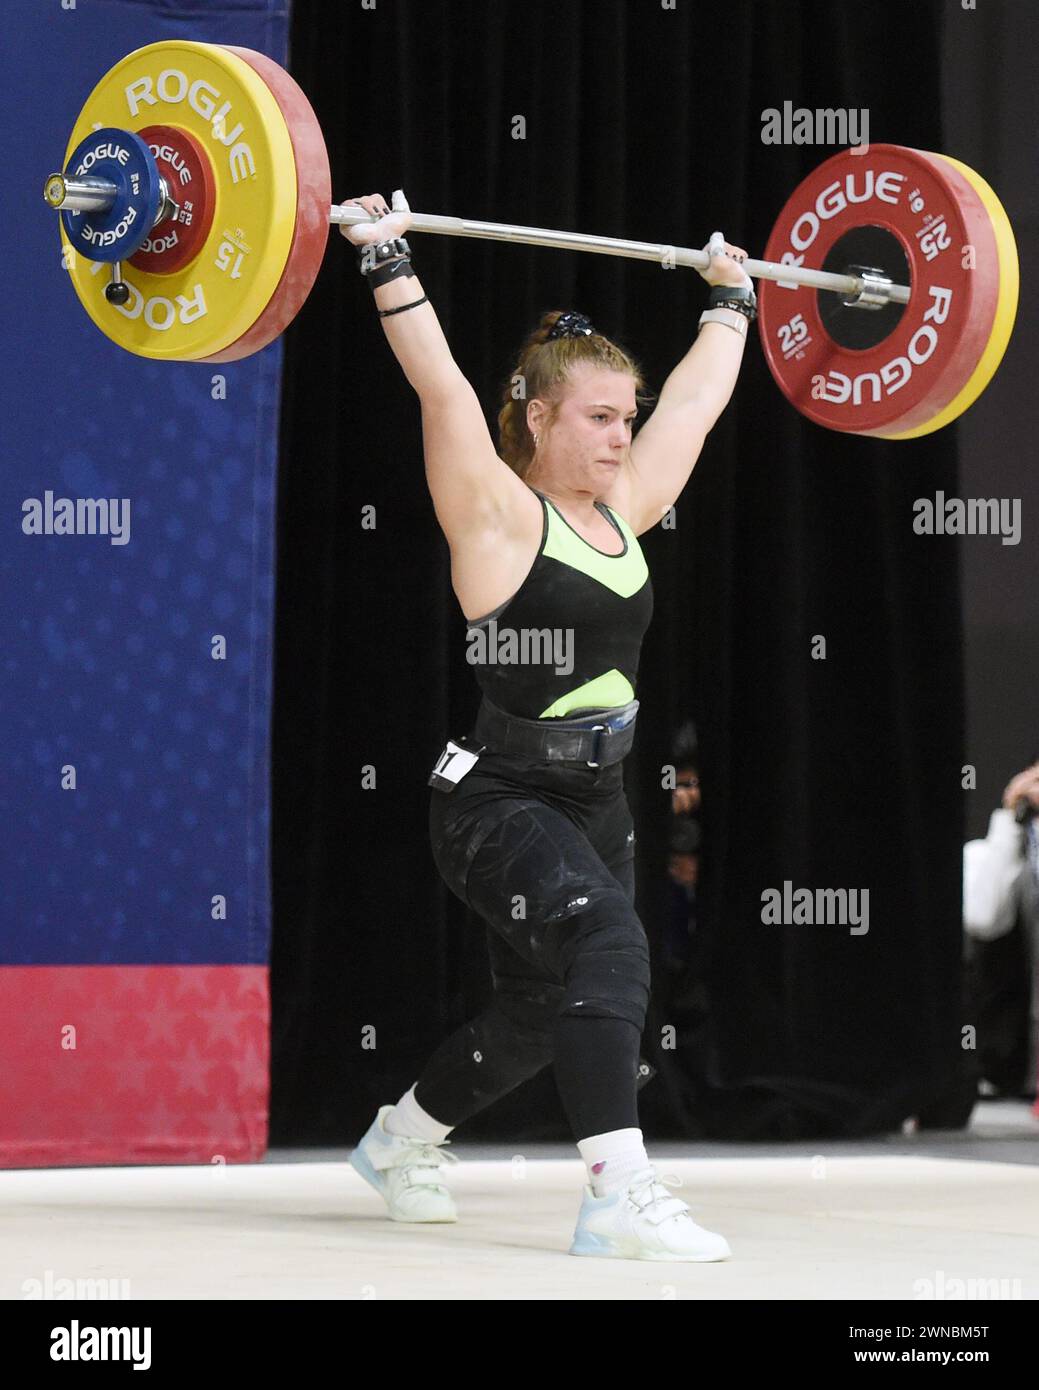 Columbus, Ohio, United States. Mar 1 Feb, 2024. Miranda Ulrey lifts 110kgs in the clean and jerk in the Women's Weightlifting Championships at the Arnold Sports Festival in Columbus, Ohio, USA. This lift was a Junior American Record. Credit: Brent Clark/Alamy Live News Stock Photo